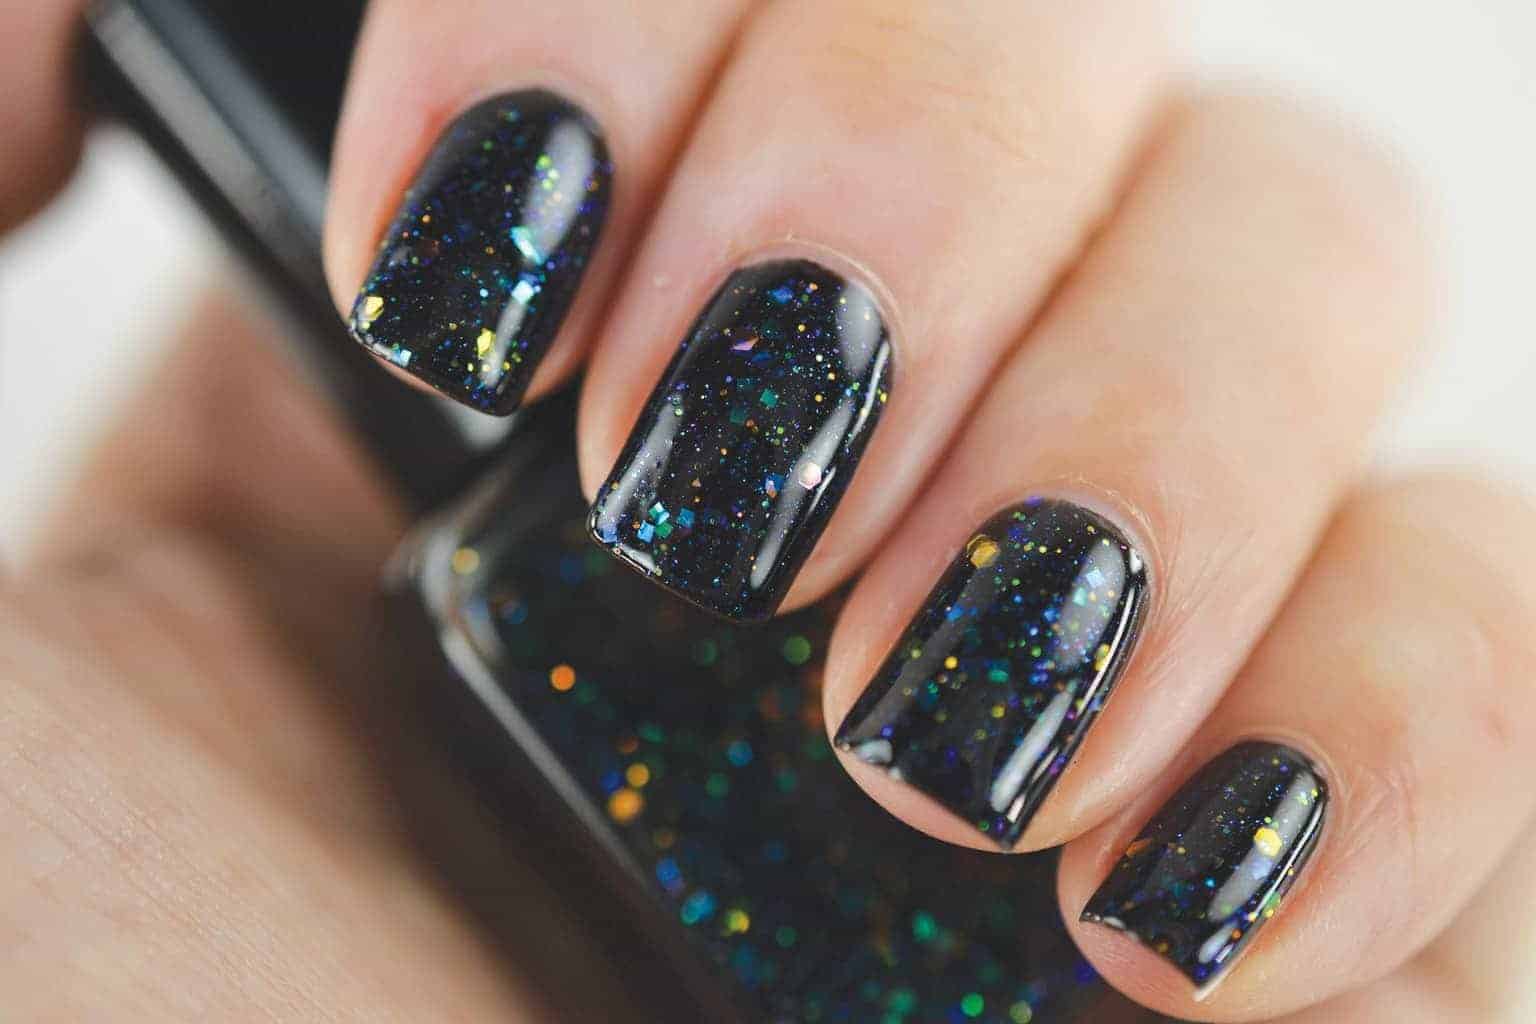 How To Do The Amazing Galaxy Nails: 10 Simple Steps